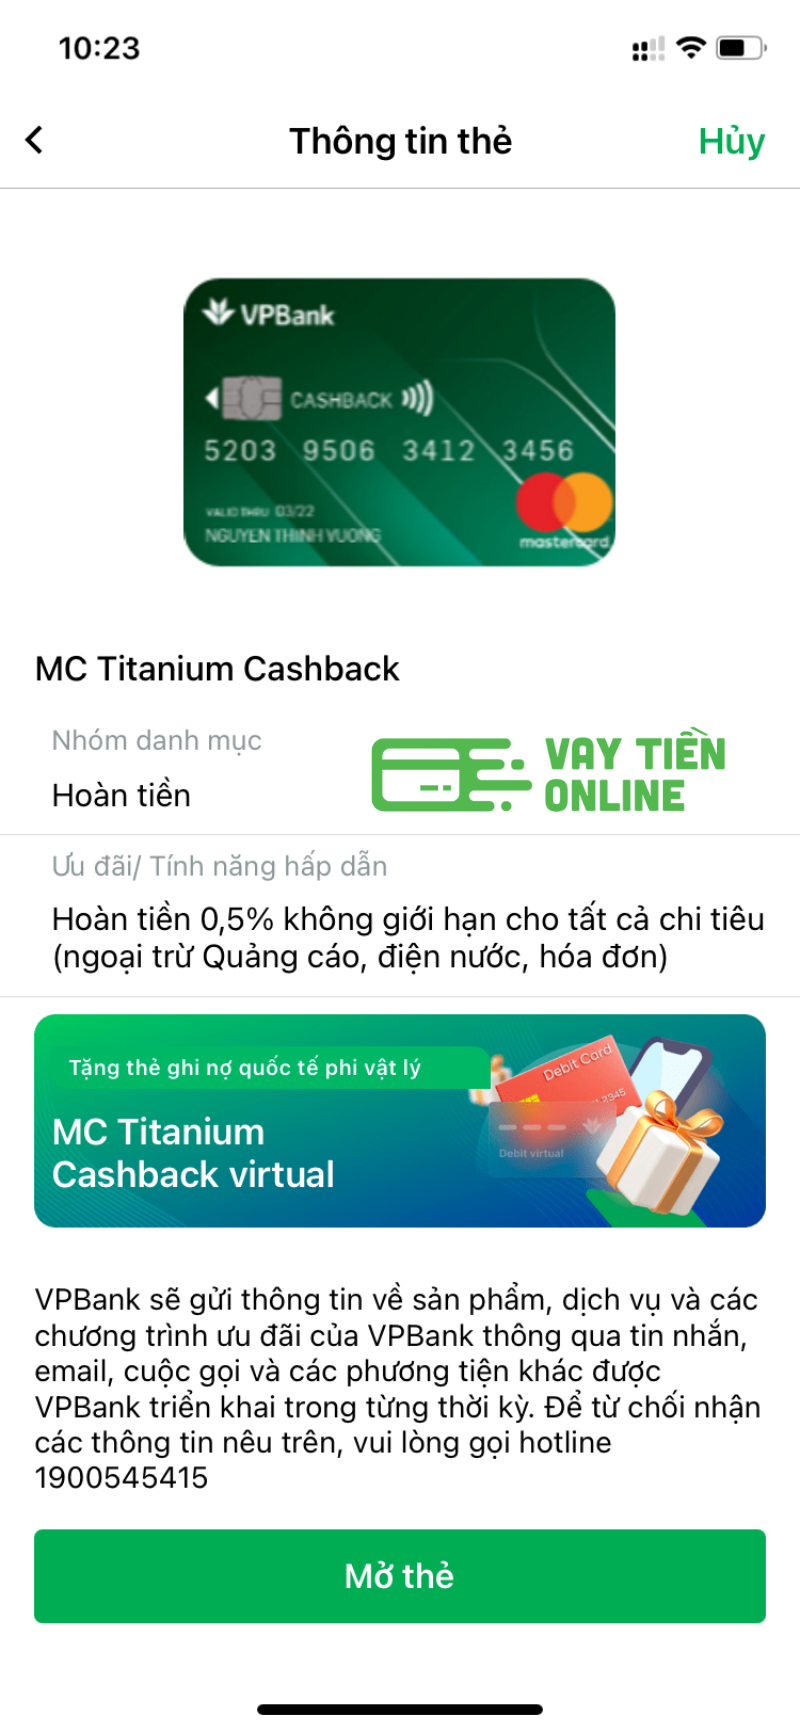 Mo the ghi no VPBank online 4